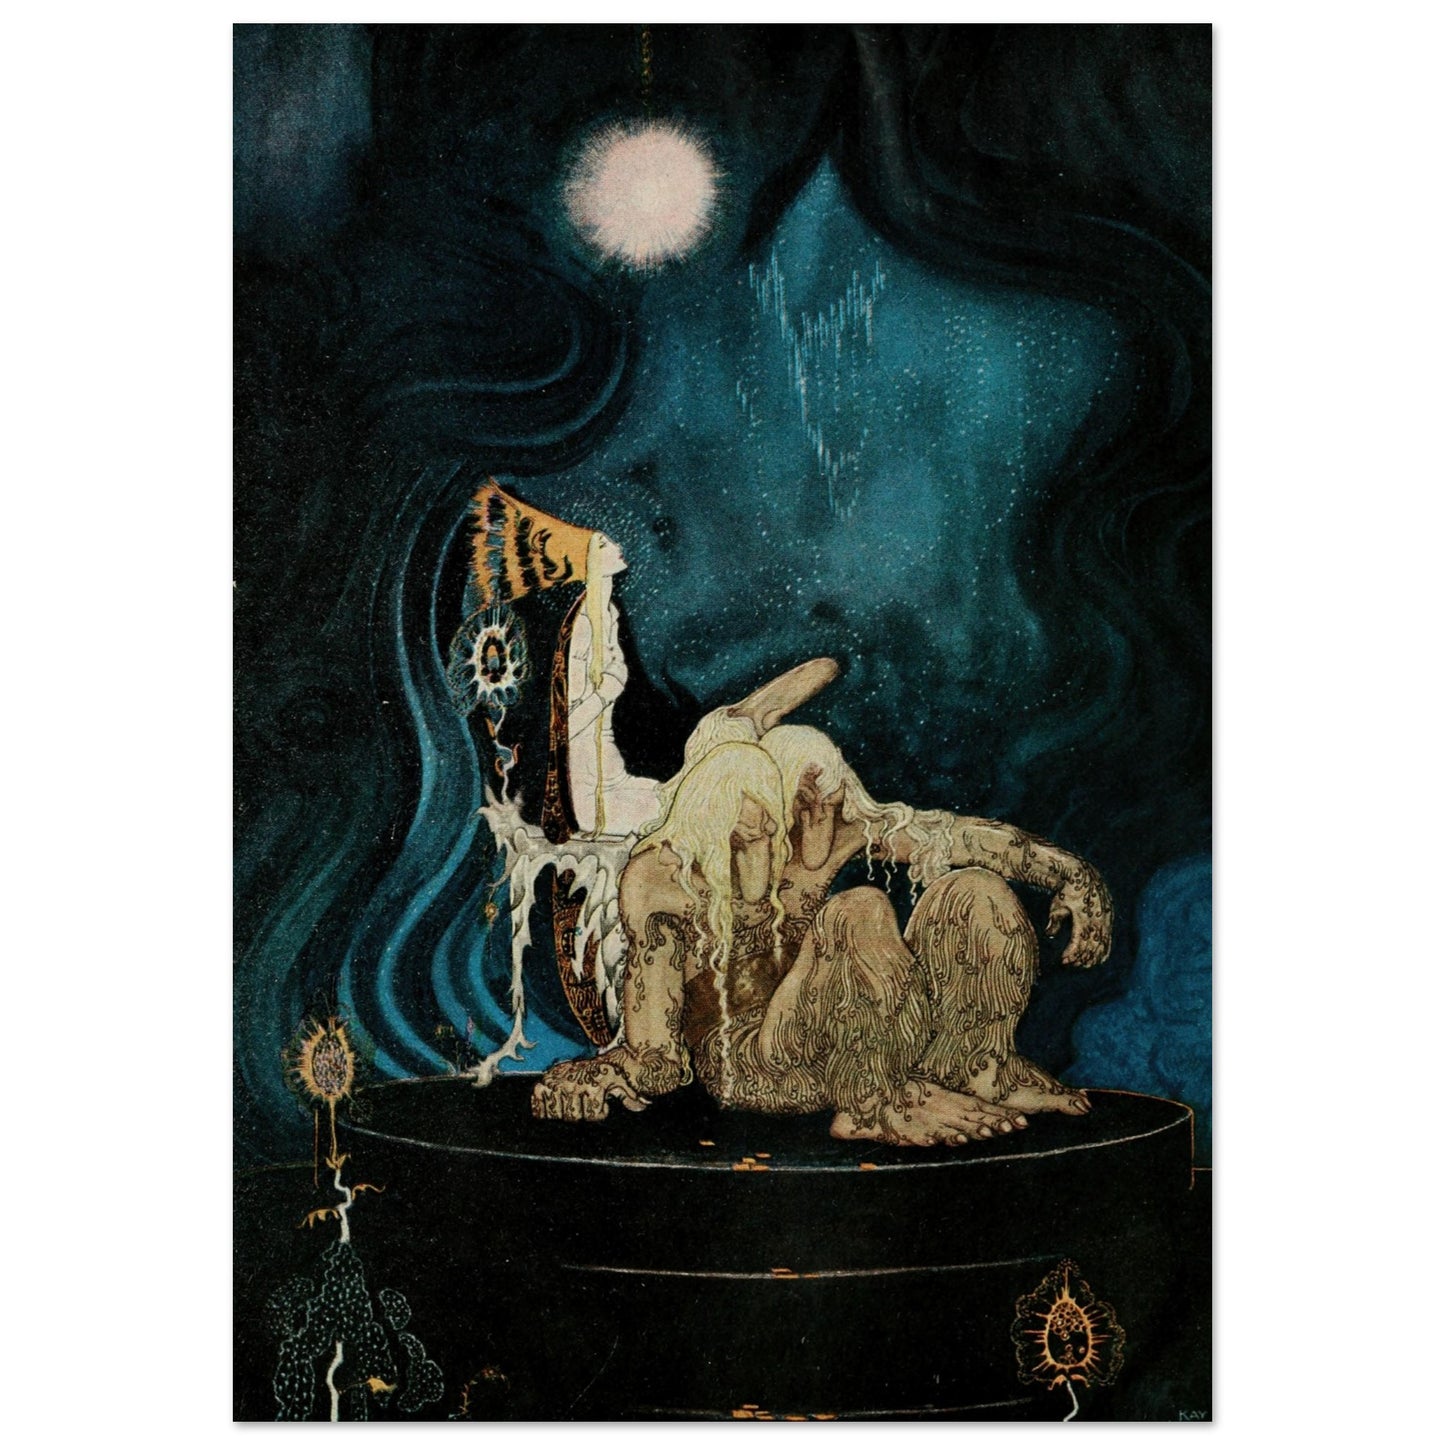 KAY RASMUS NIELSEN - EAST OF THE SUN AND WEST OF THE MOON PL 23 (1922) 